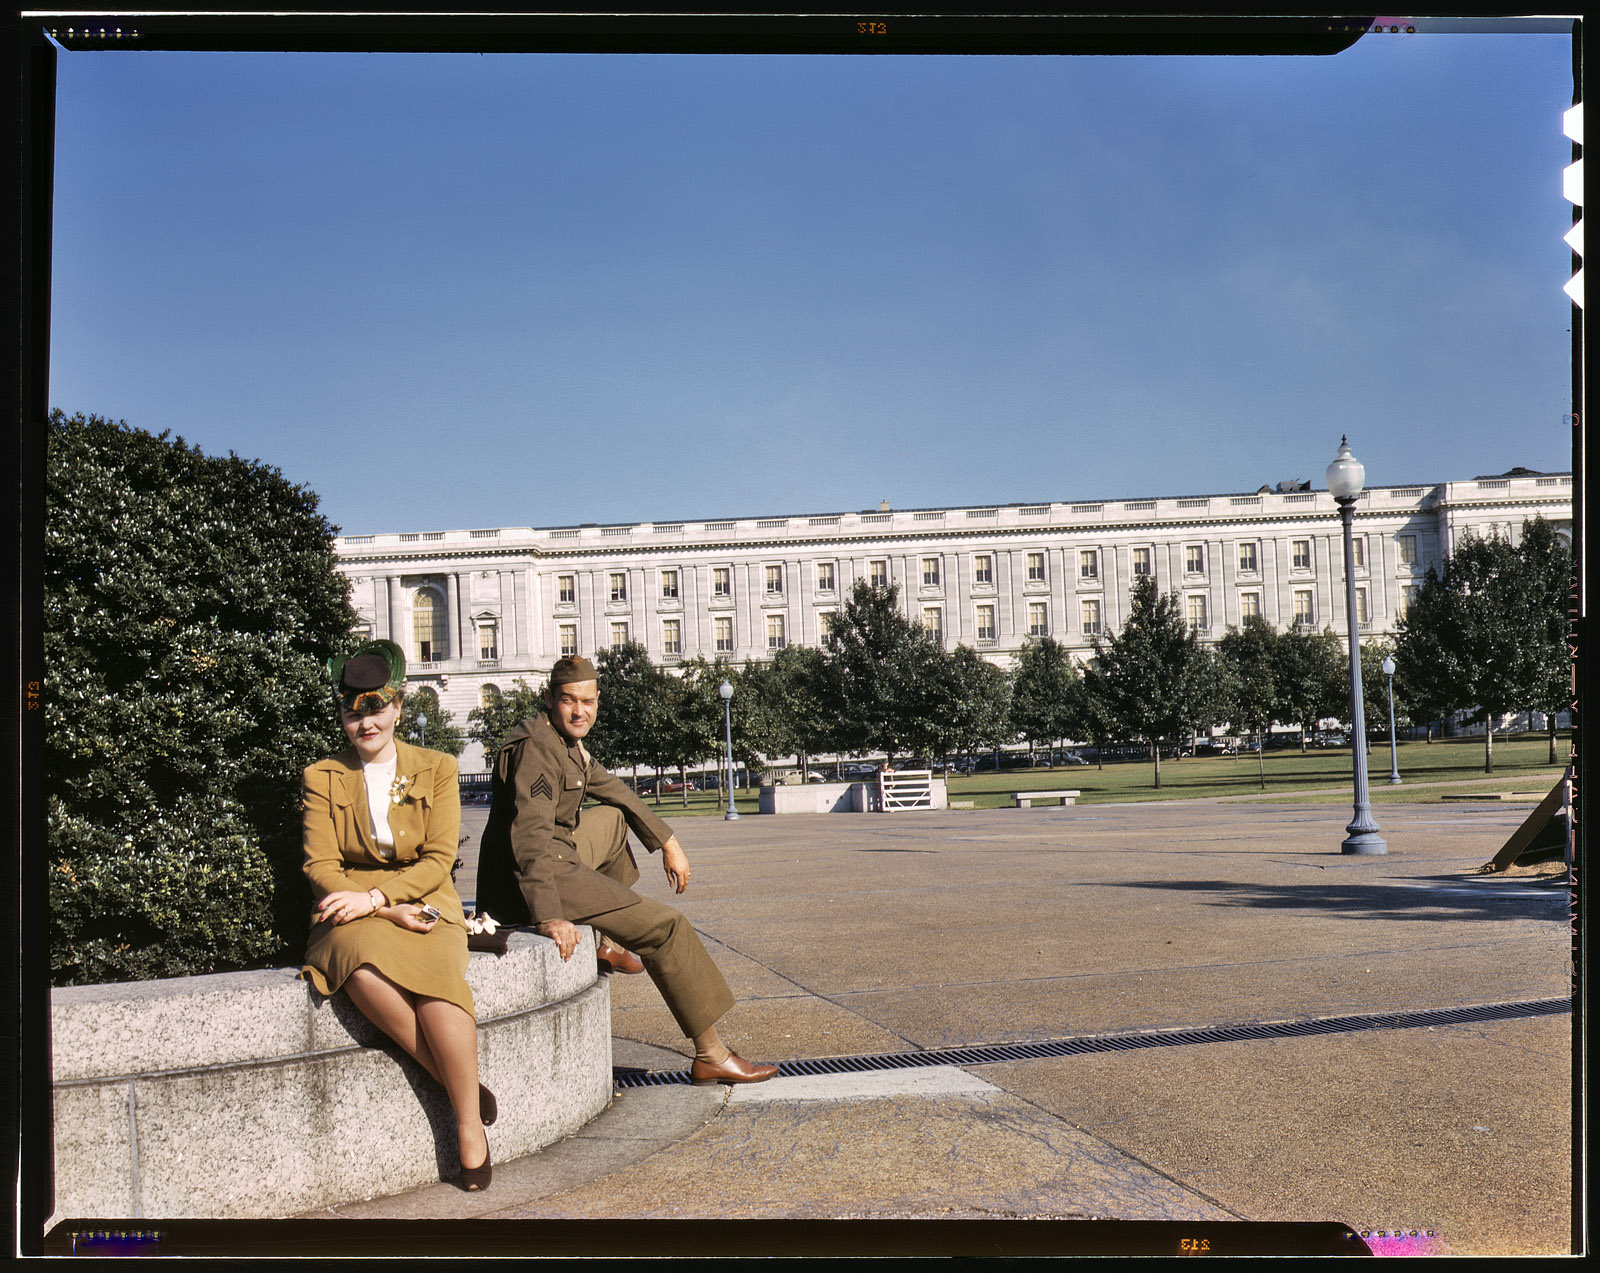 1943. On maneuvers in wartime Washington. "A soldier and a woman in a park, with the Old [Russell] Senate Office Building behind them." View full size. 4x5 Kodachrome transparency, photographer unknown. Office of War Information.